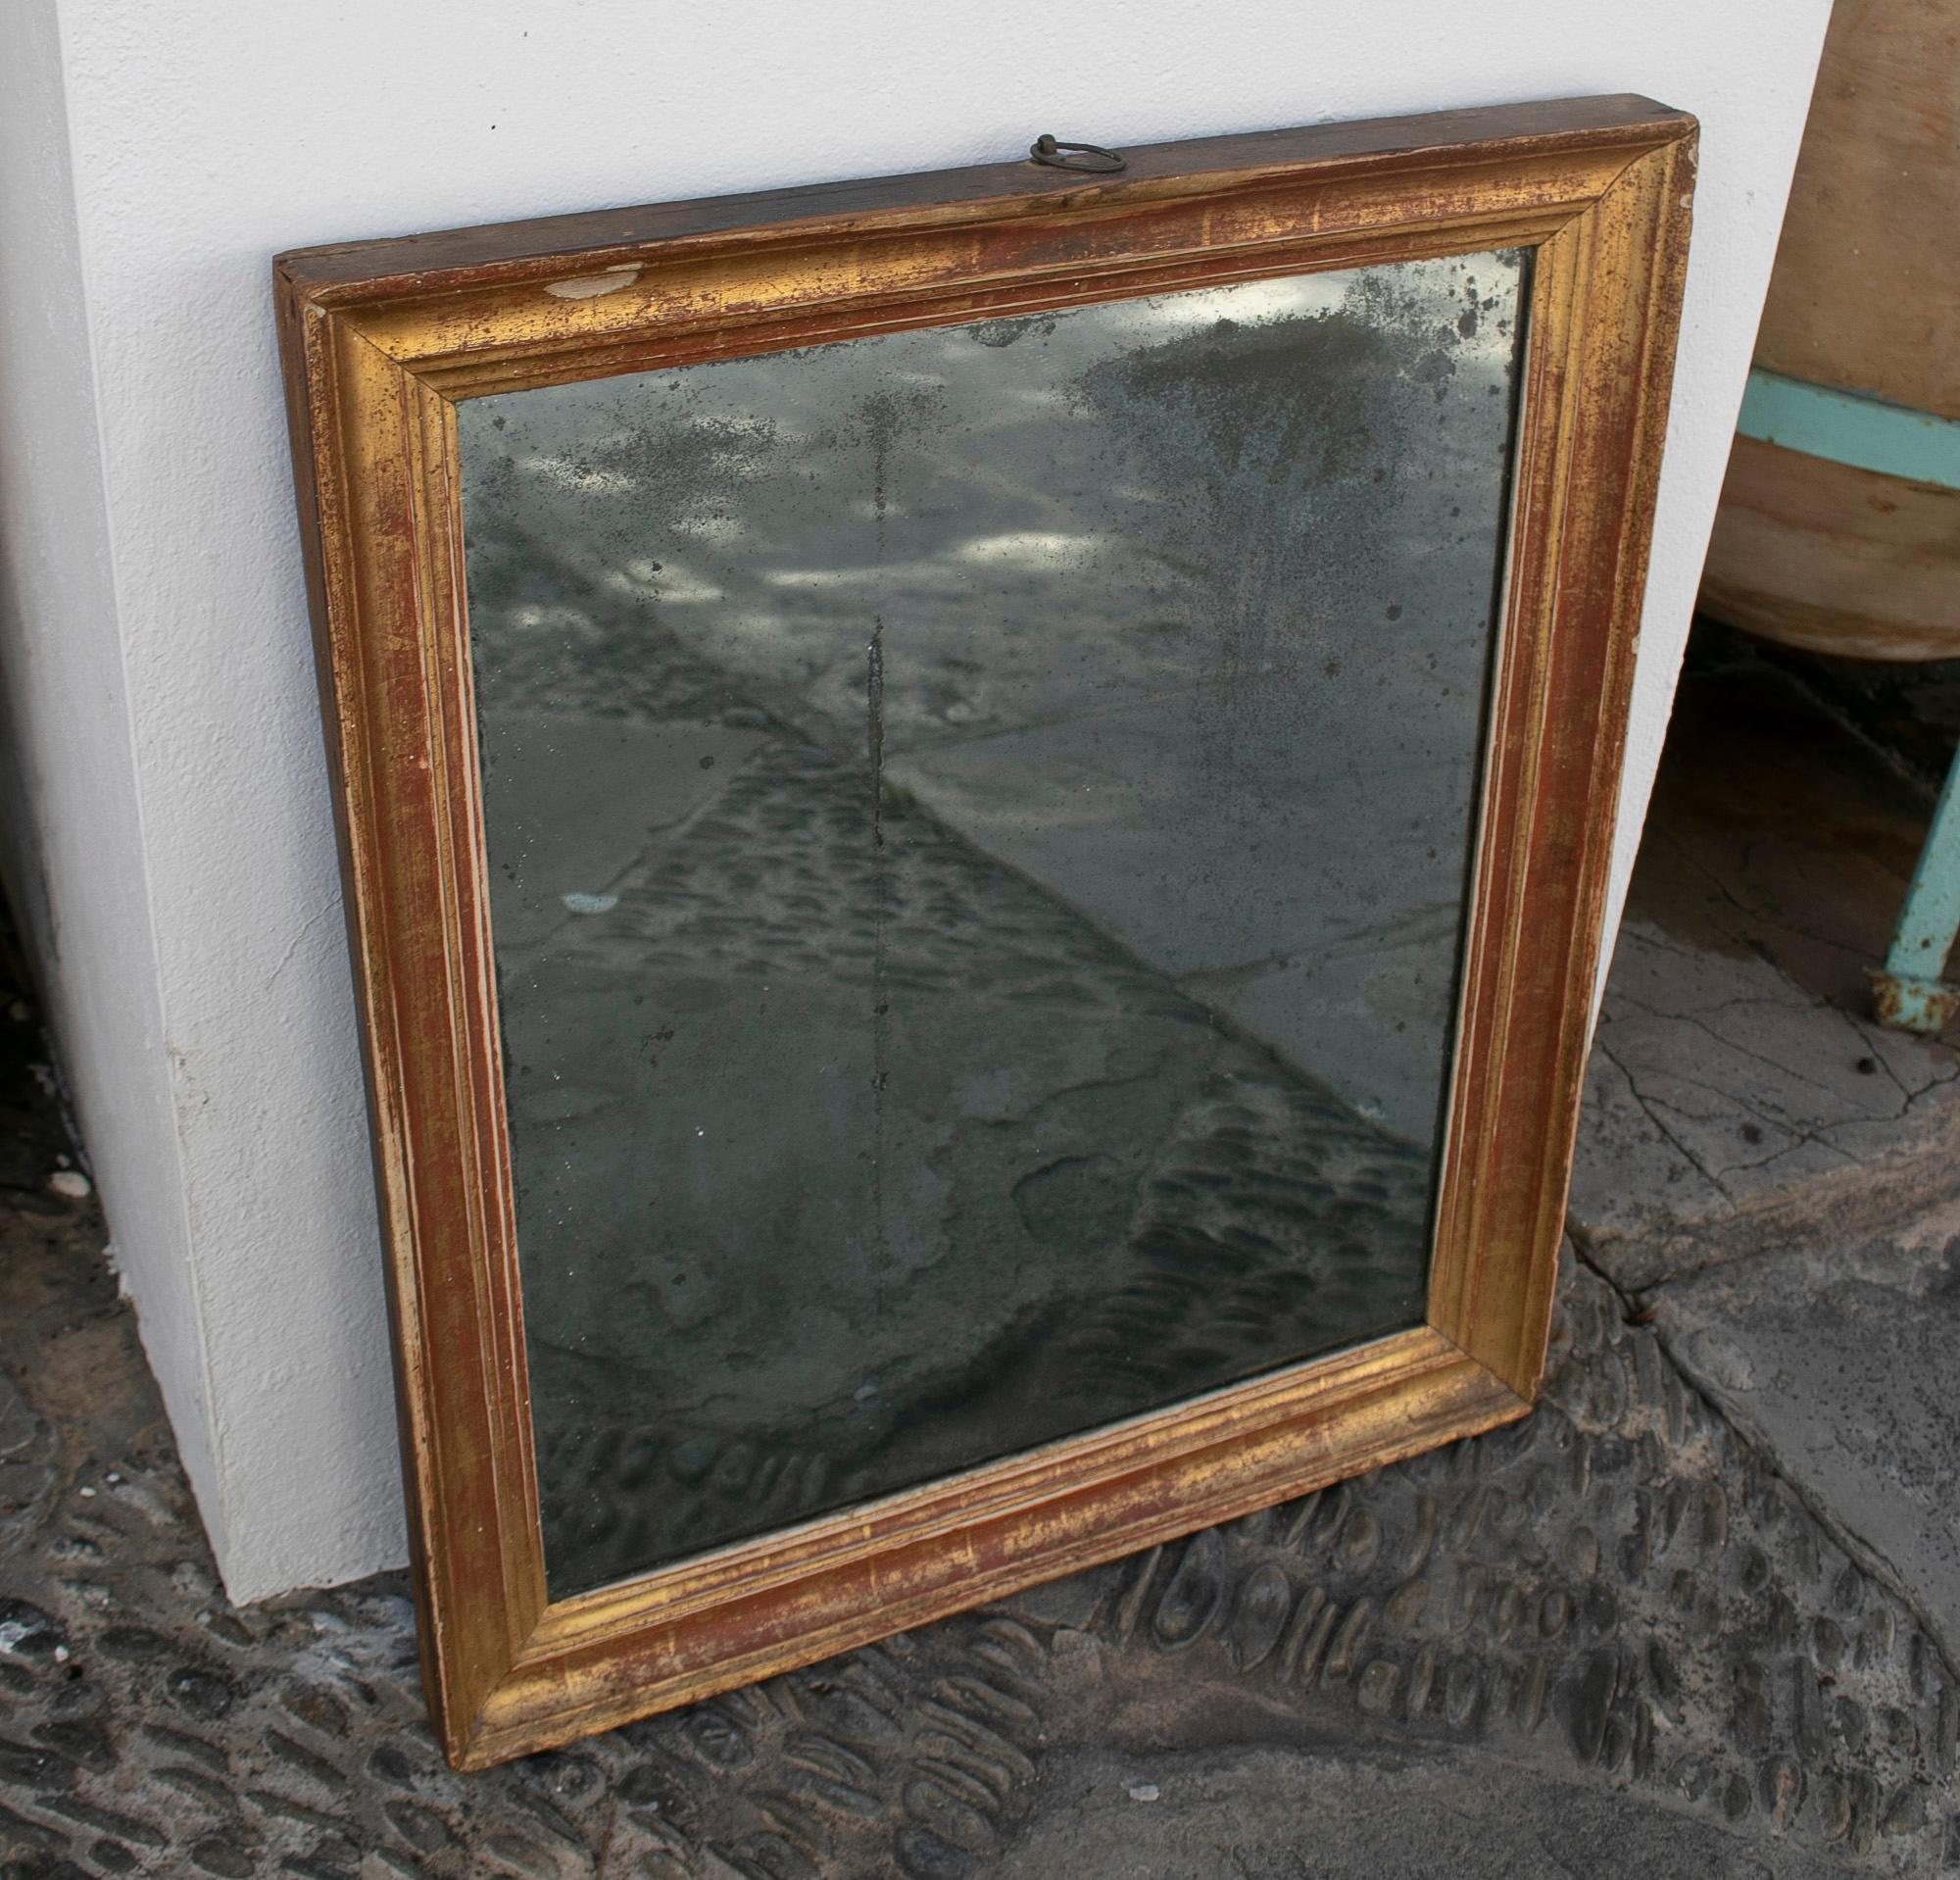 Antique 19th century French original mirror with giltwood frame.